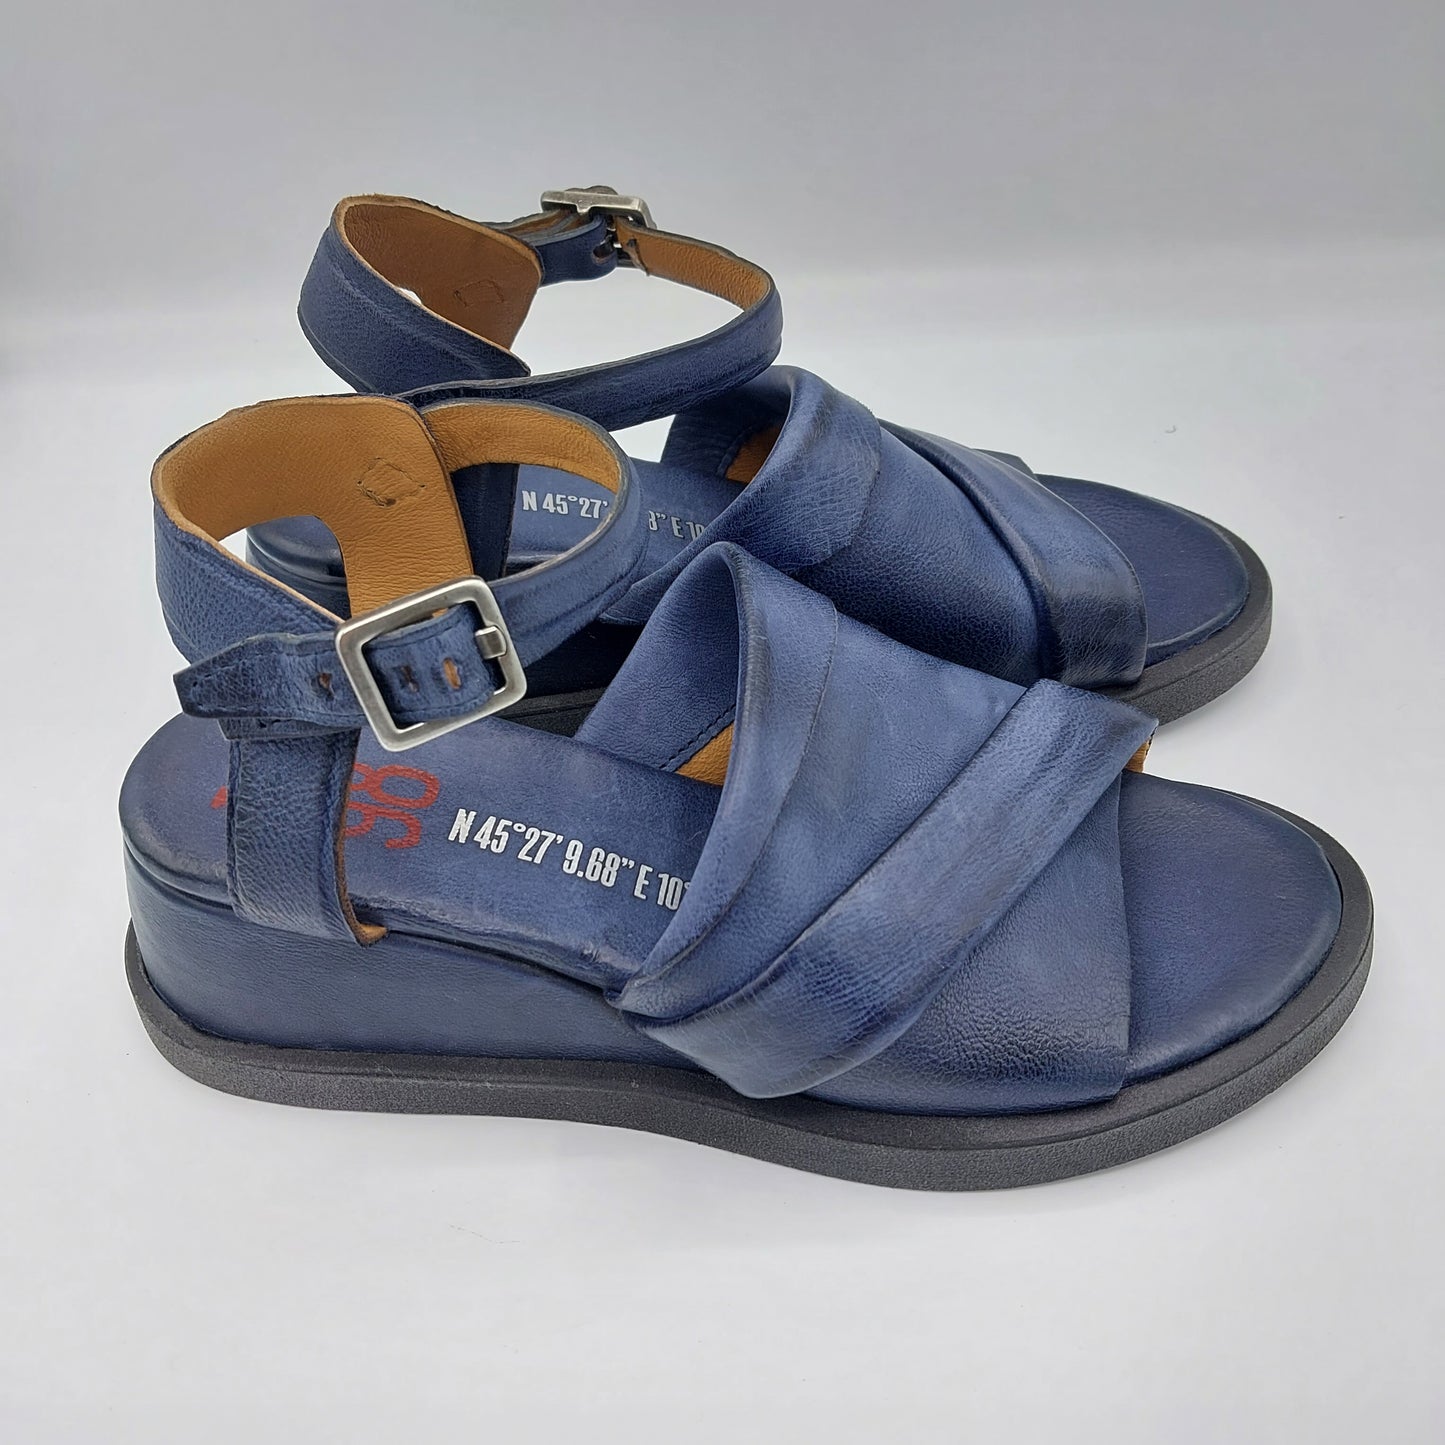 AS98 sandal in blue leather